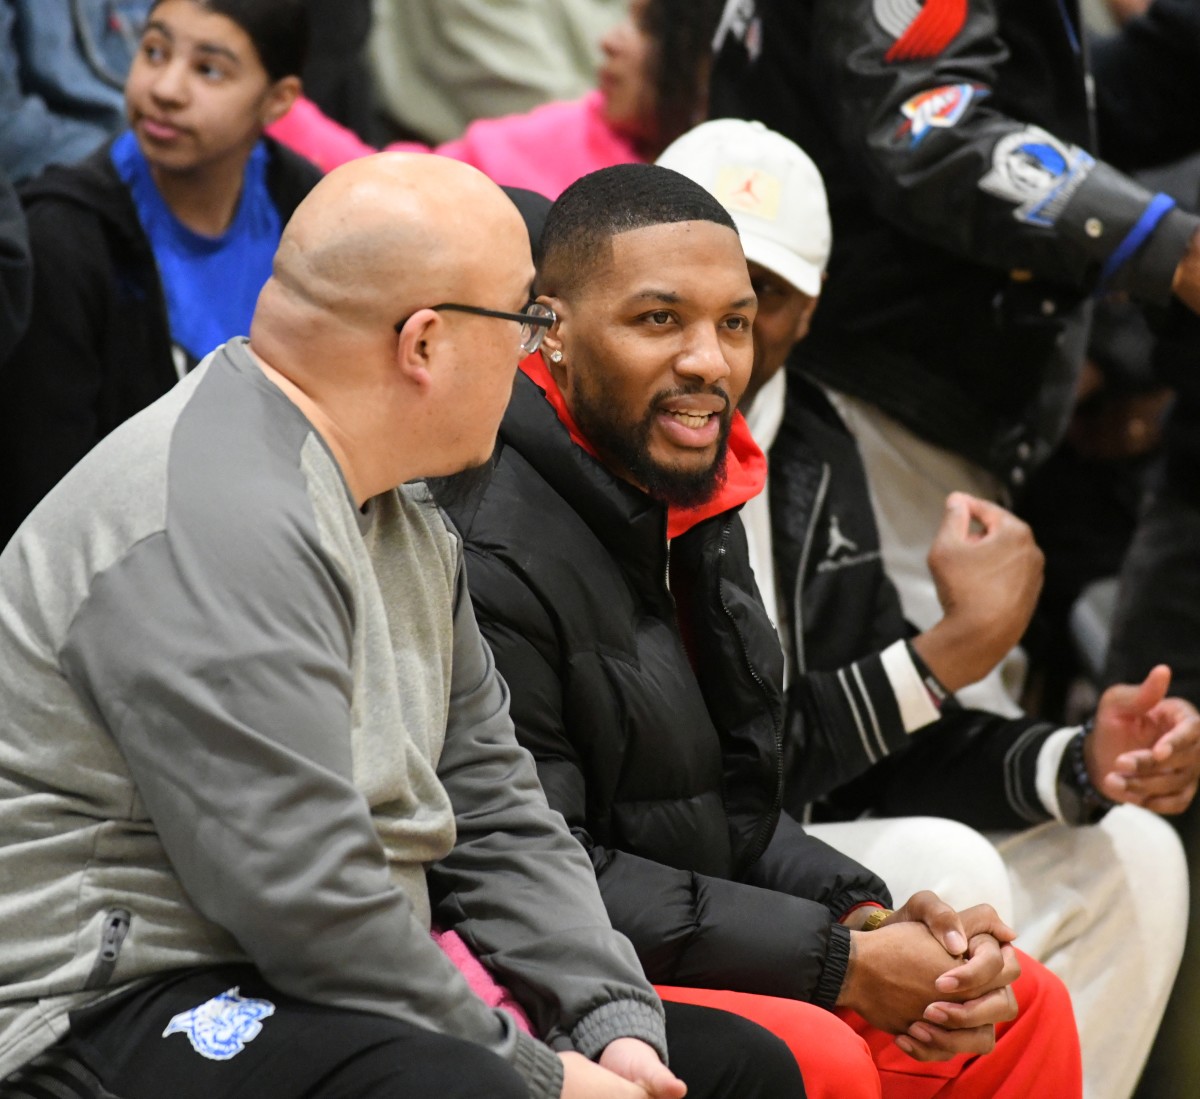 Oakland alum Damian Lillard (middle) was amongst a packed house Tuesday at Oakland Tech, which recorded its fourth win of the season against the Wildcats.  